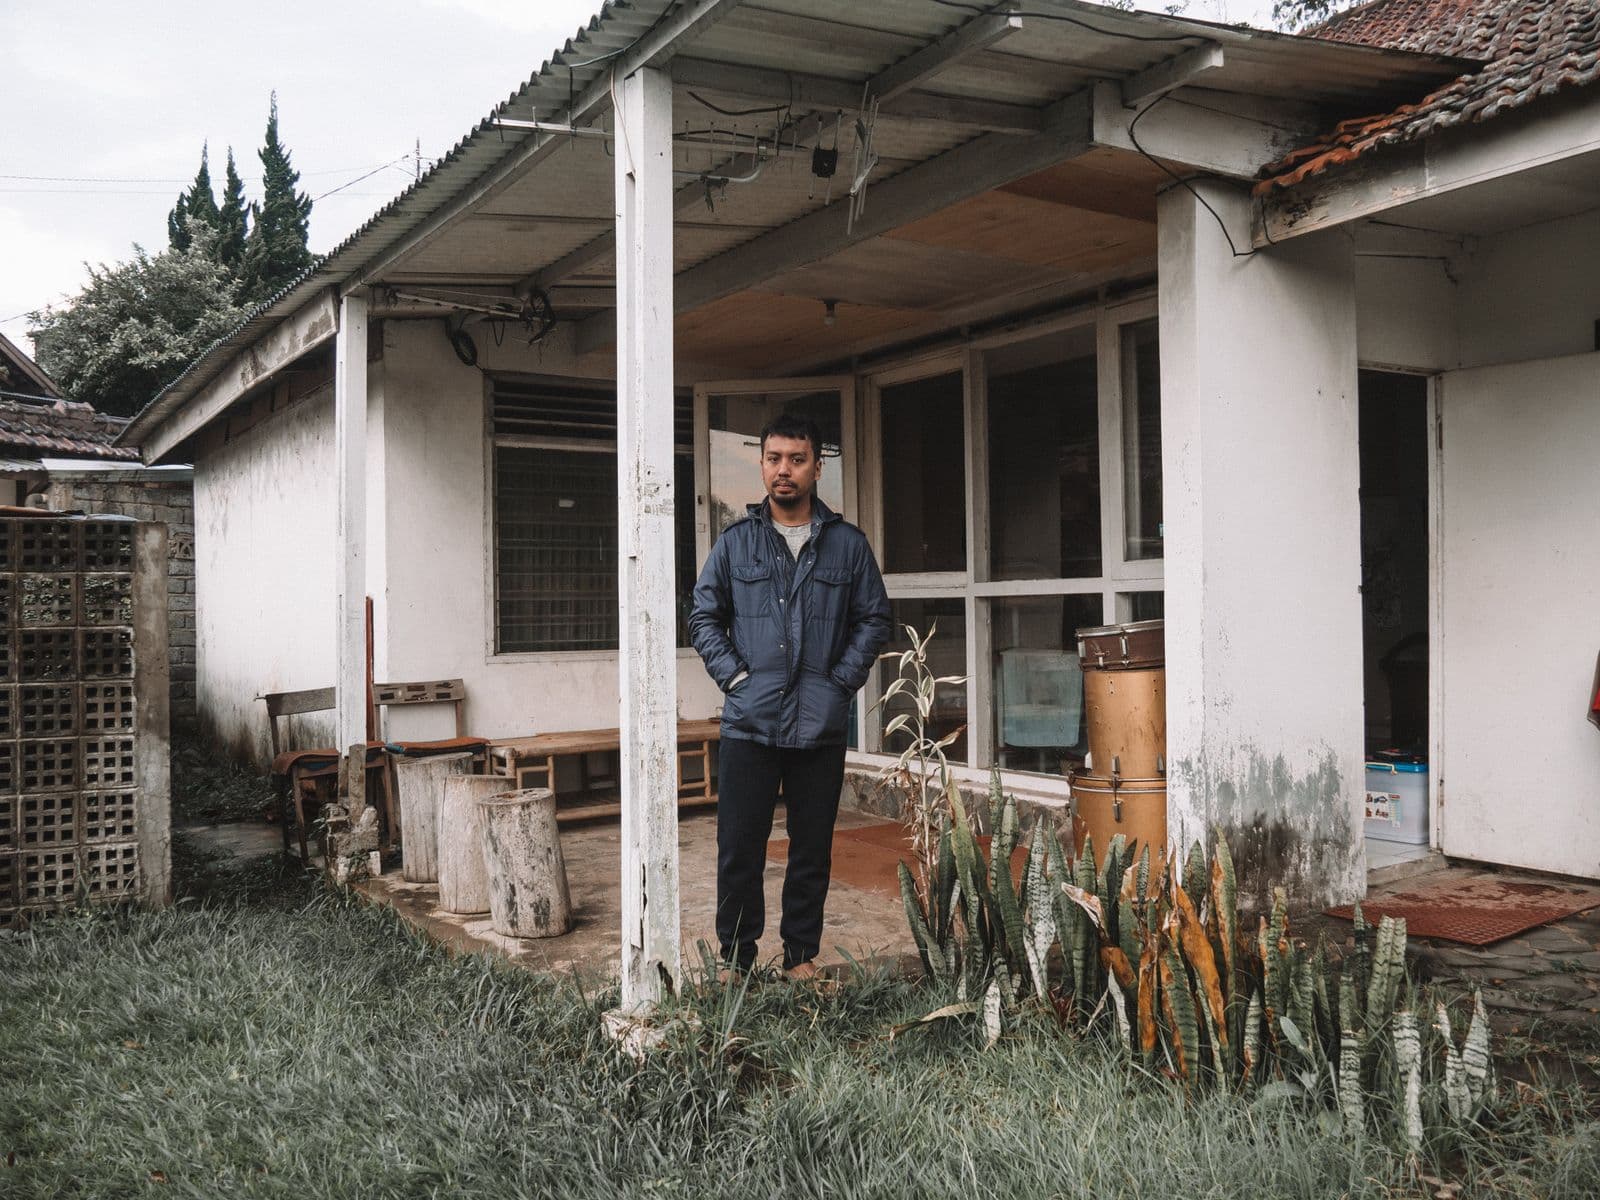 A man stands in front of a house